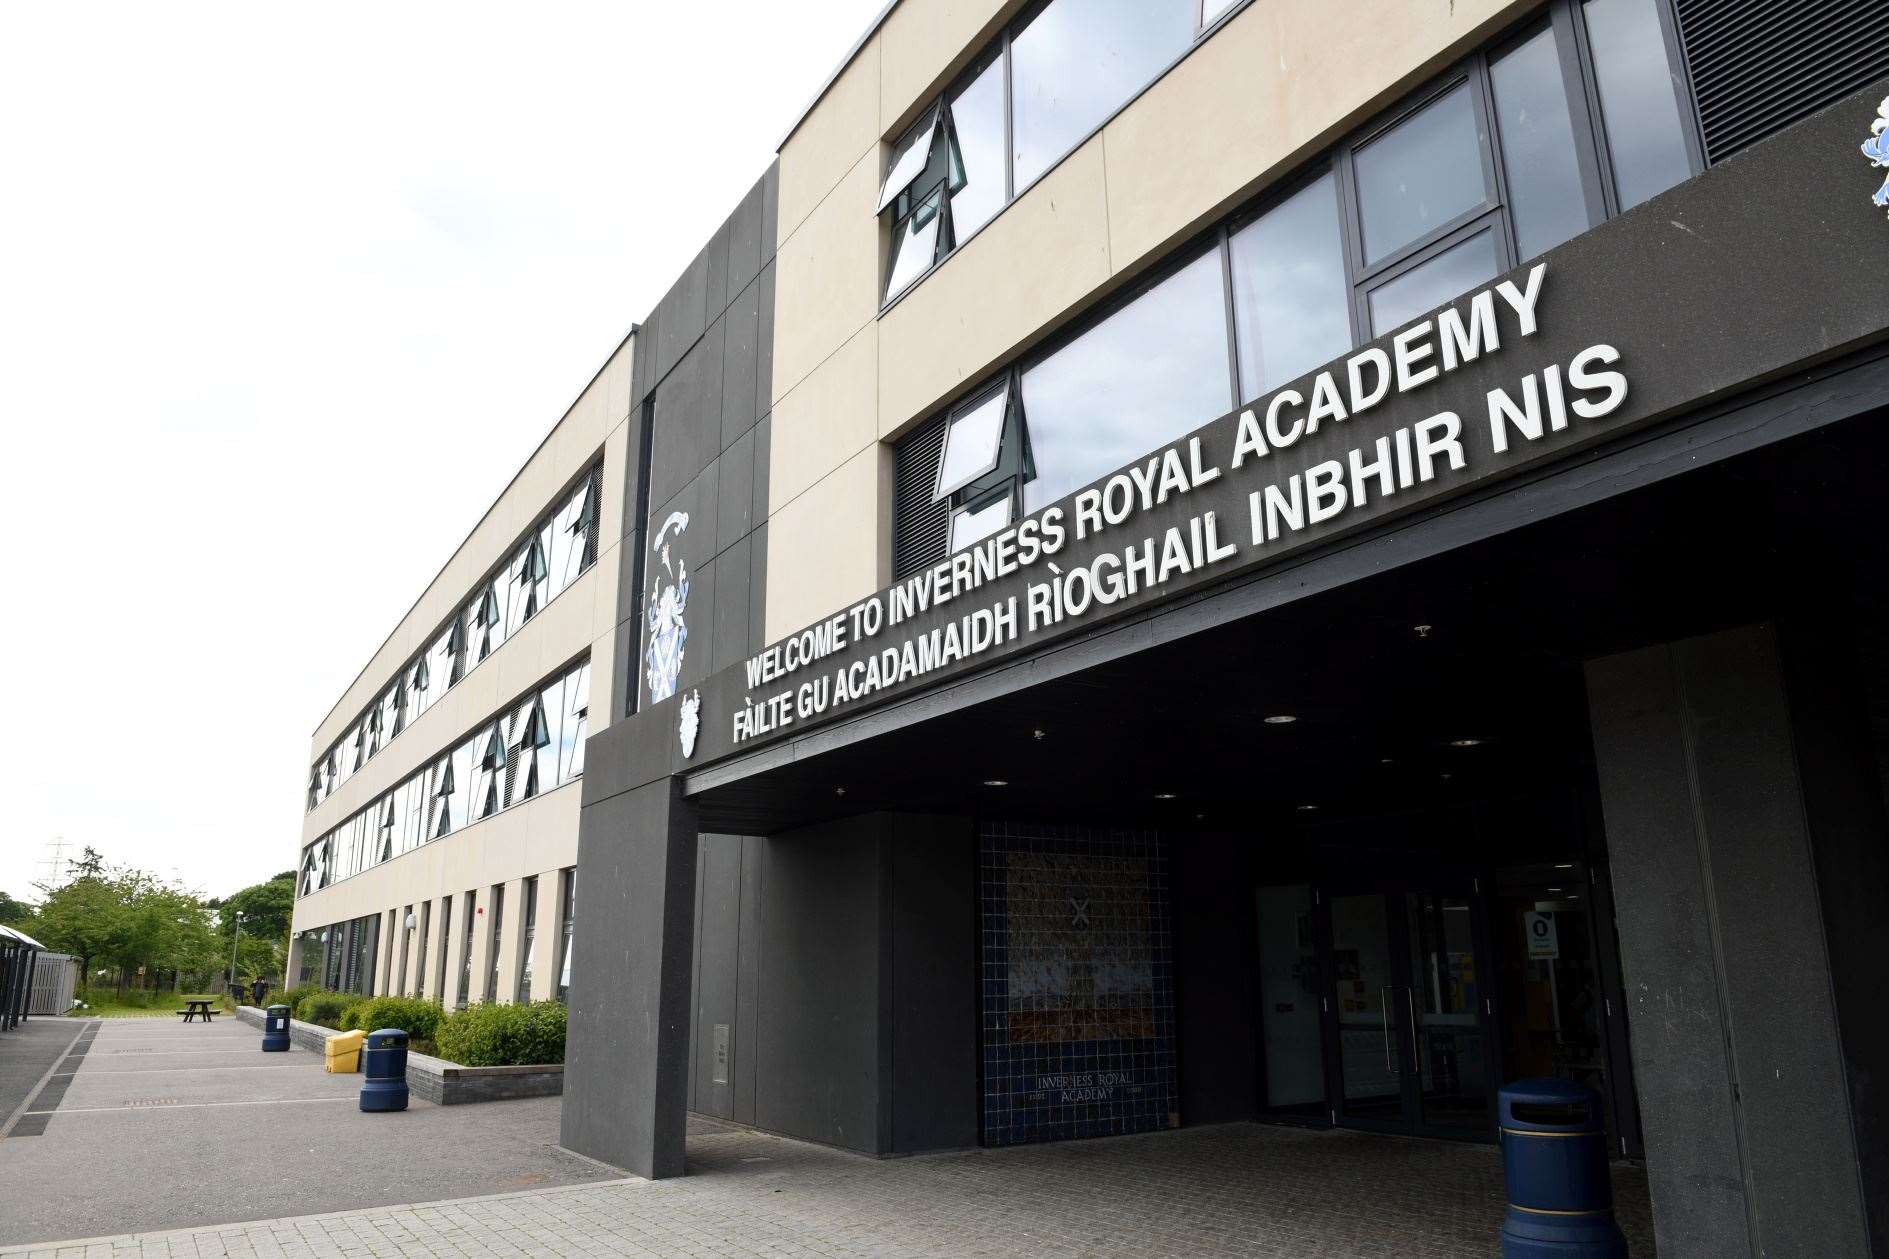 Inverness Royal Academy.